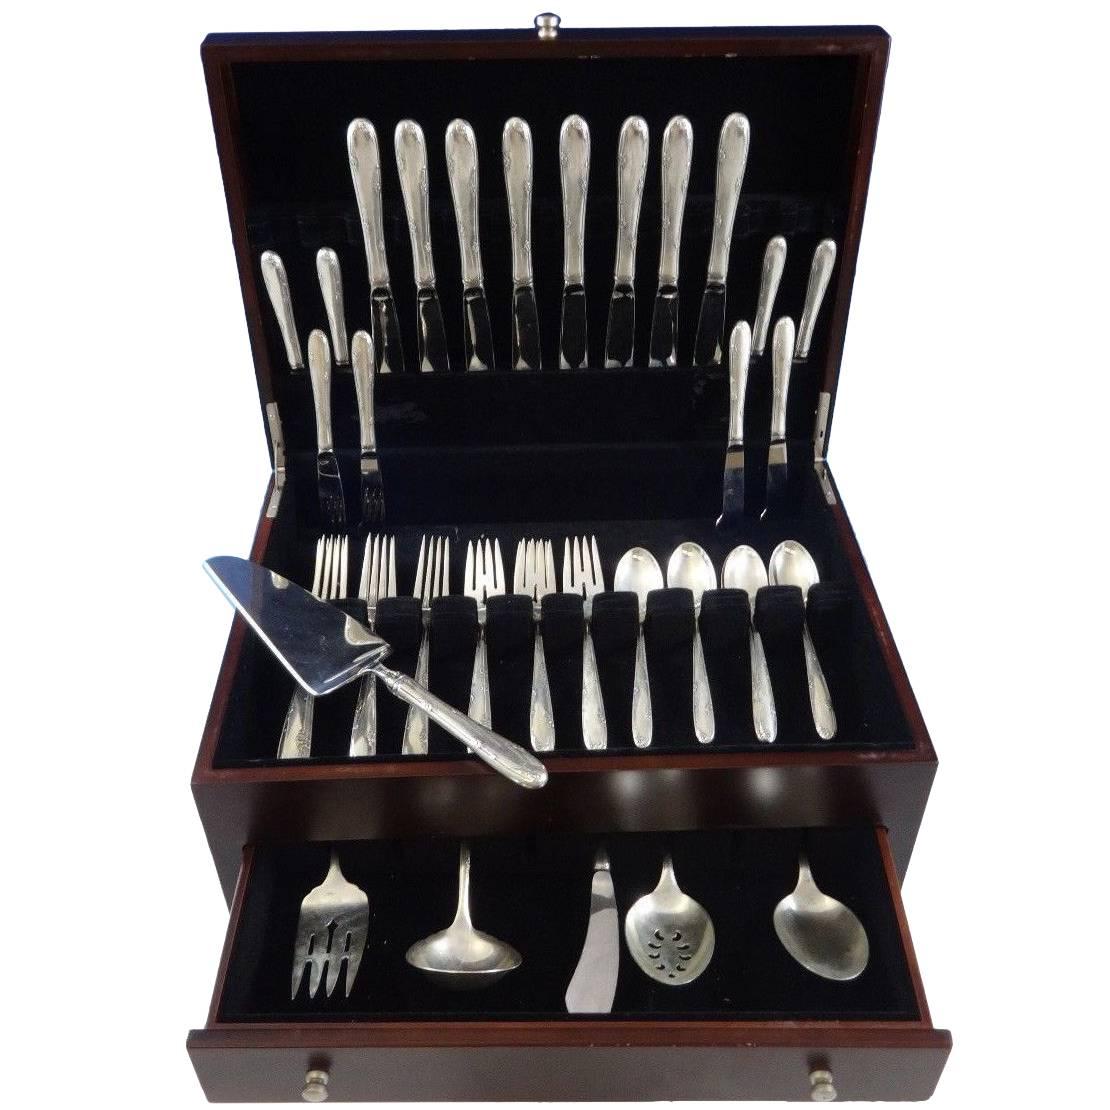 Madeira by Towle circa 1948 sterling silver flatware set of 46 pieces. This set includes:

Eight knives, 9